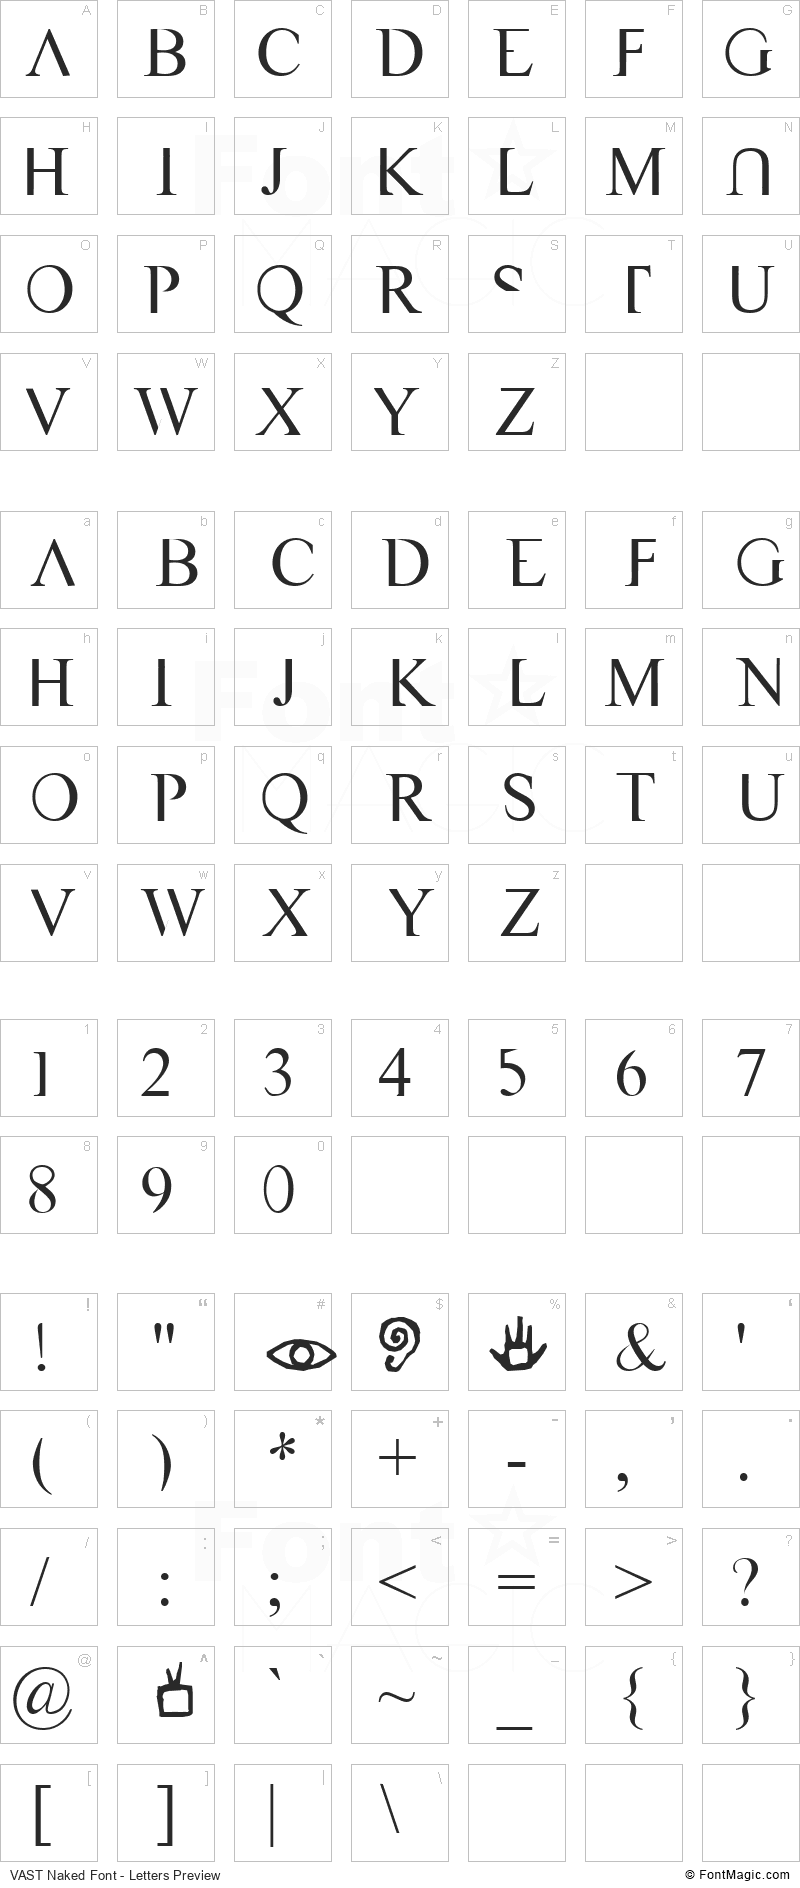 VAST Naked Font - All Latters Preview Chart